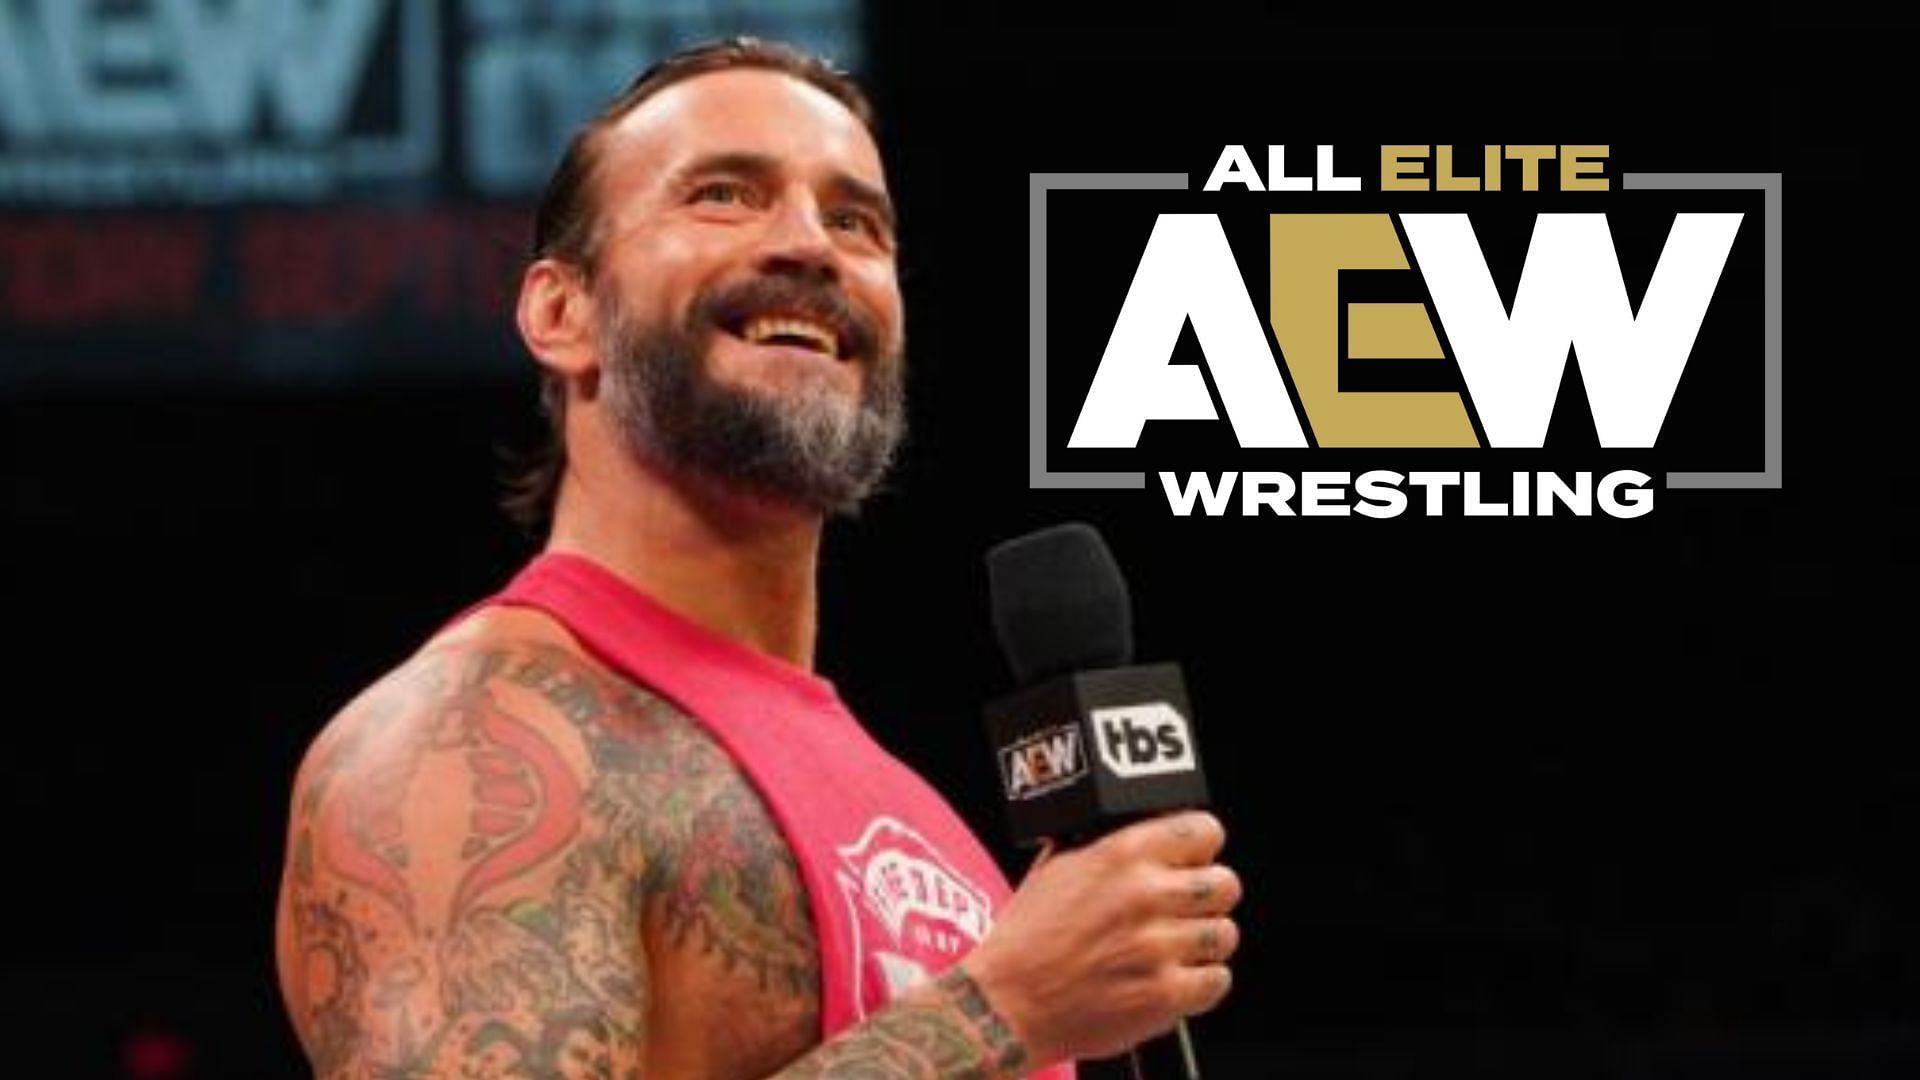 CM Punk may have to jump through some hoops to get a match against this free agent.